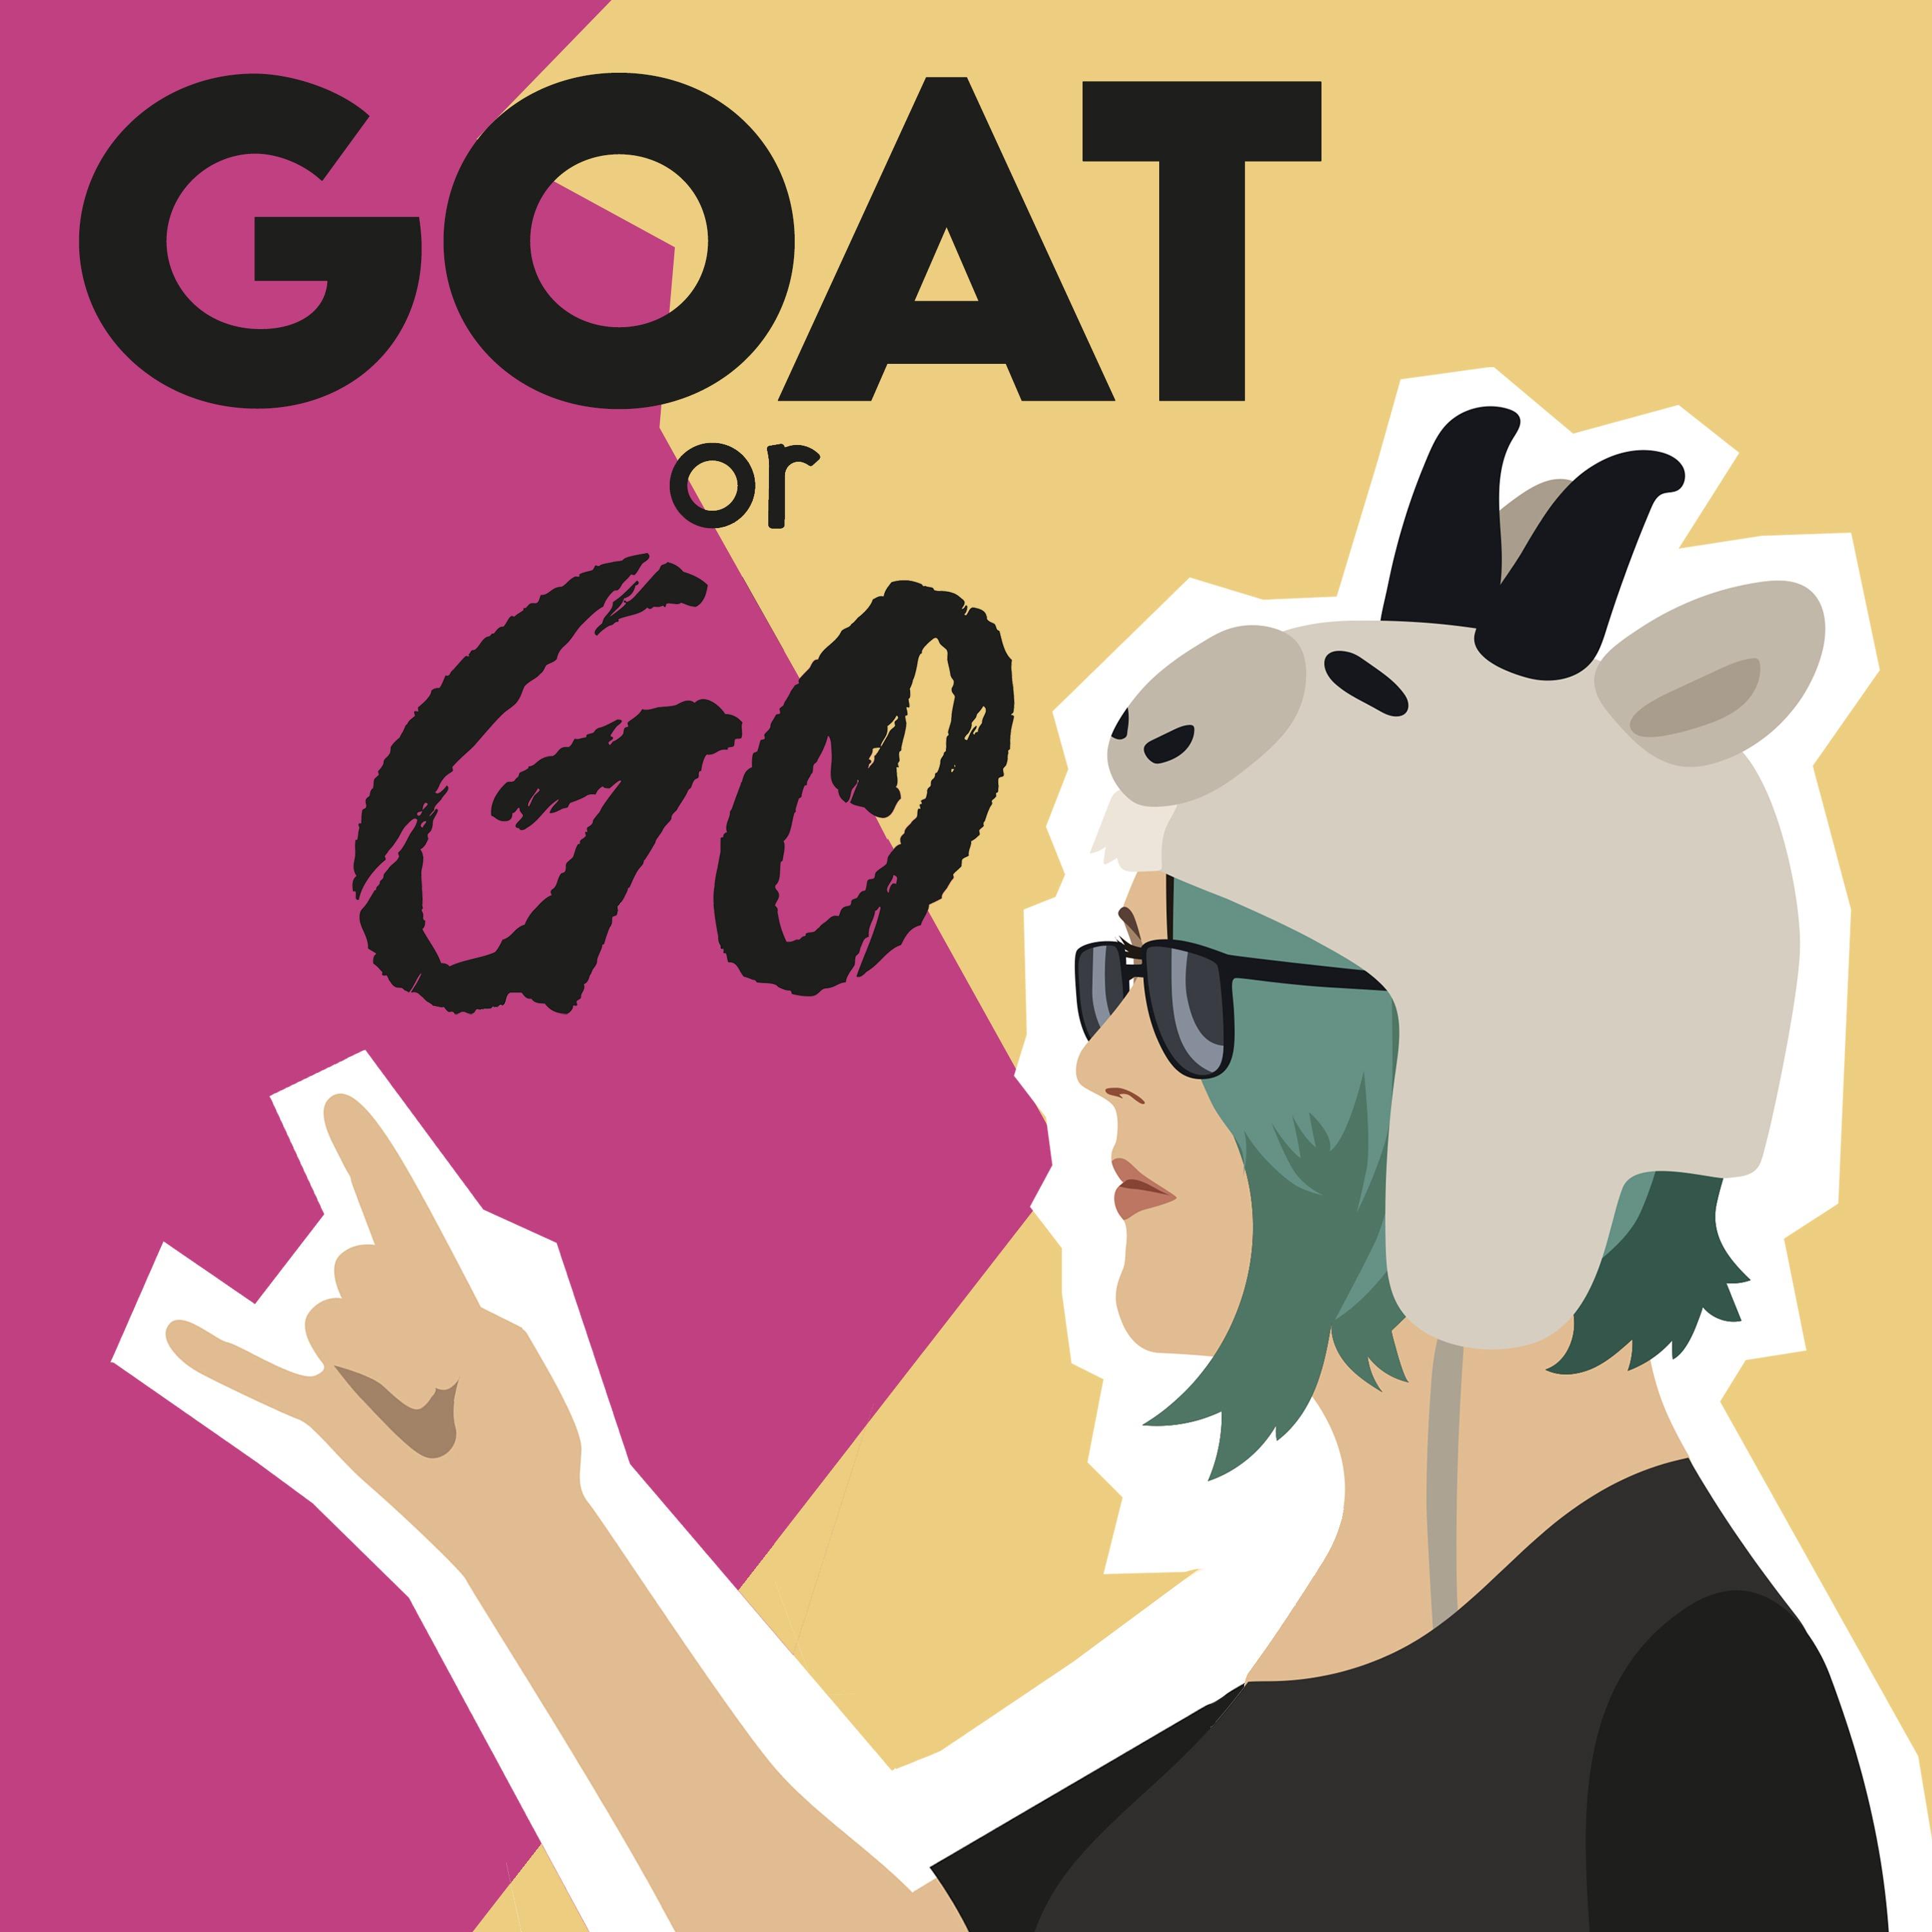 GOAT or GO